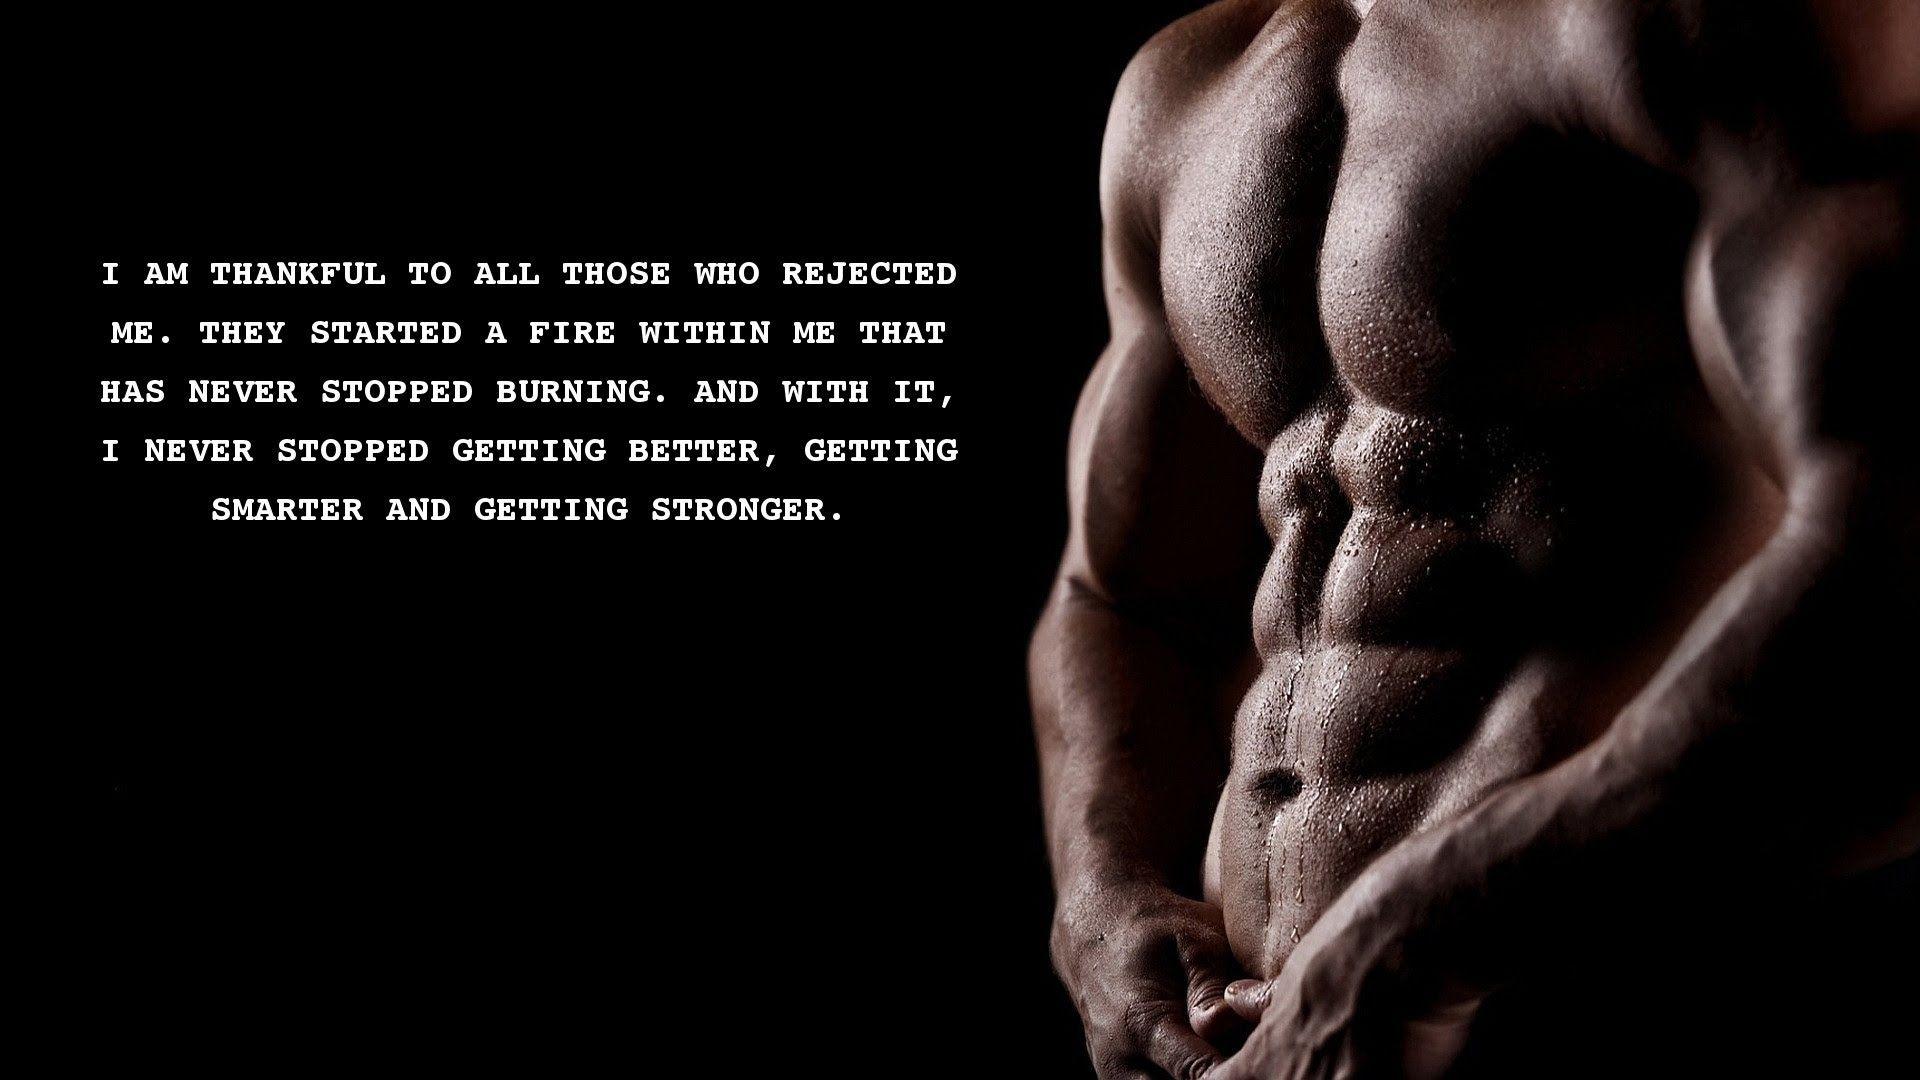 Motivational Workout Wallpaper, Picture, Image 1920x1200